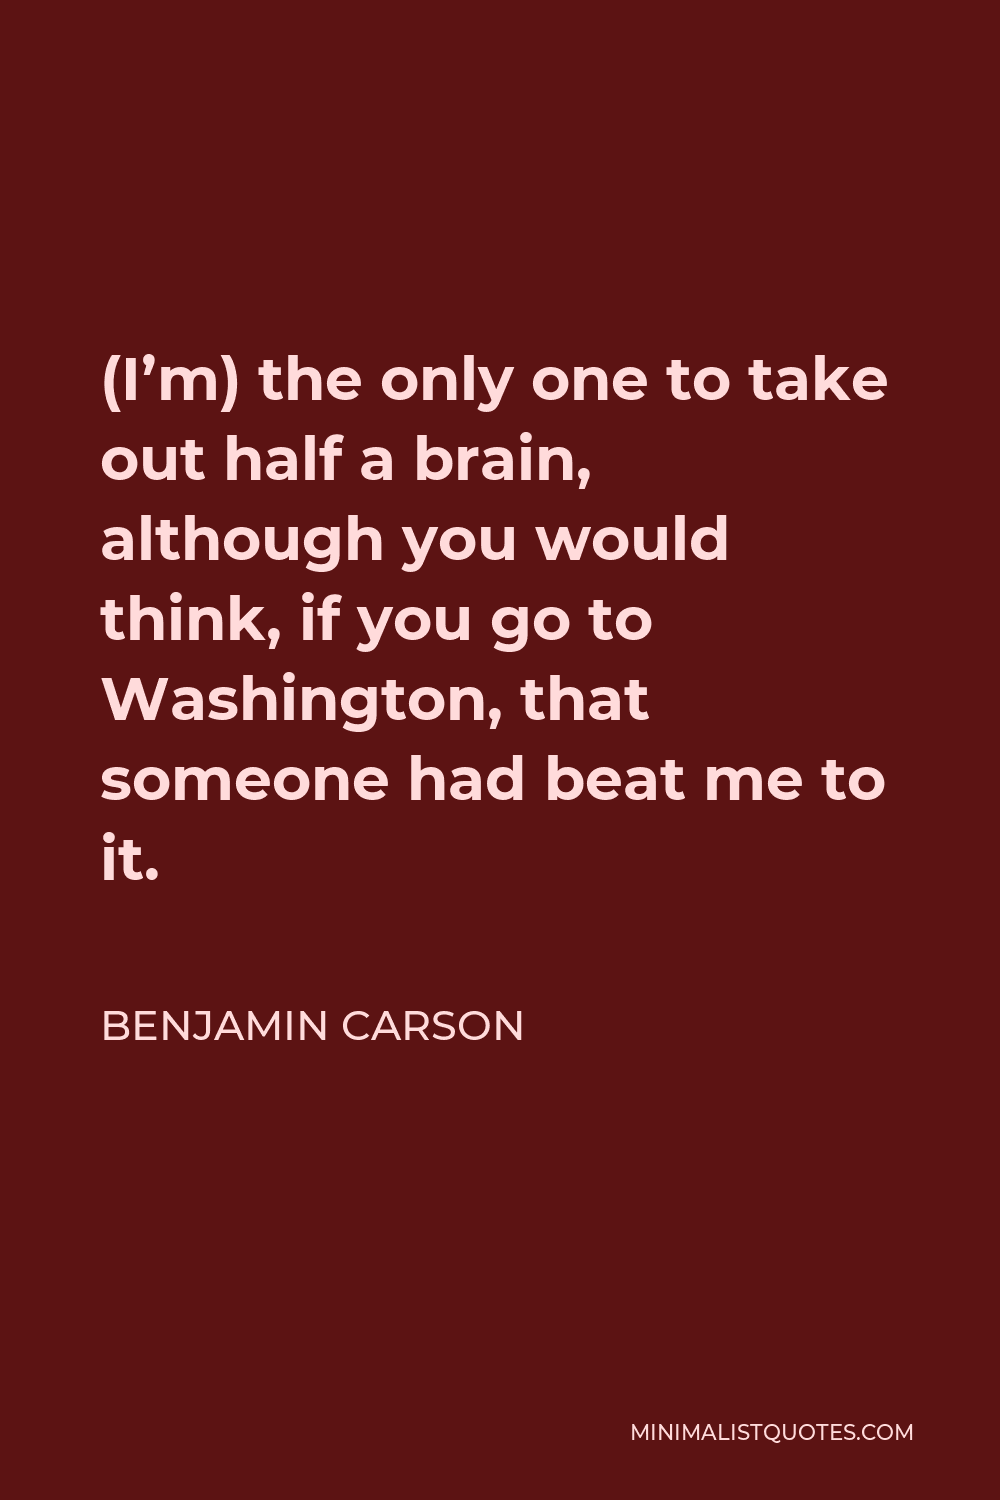 Benjamin Carson Quote - (I’m) the only one to take out half a brain, although you would think, if you go to Washington, that someone had beat me to it.